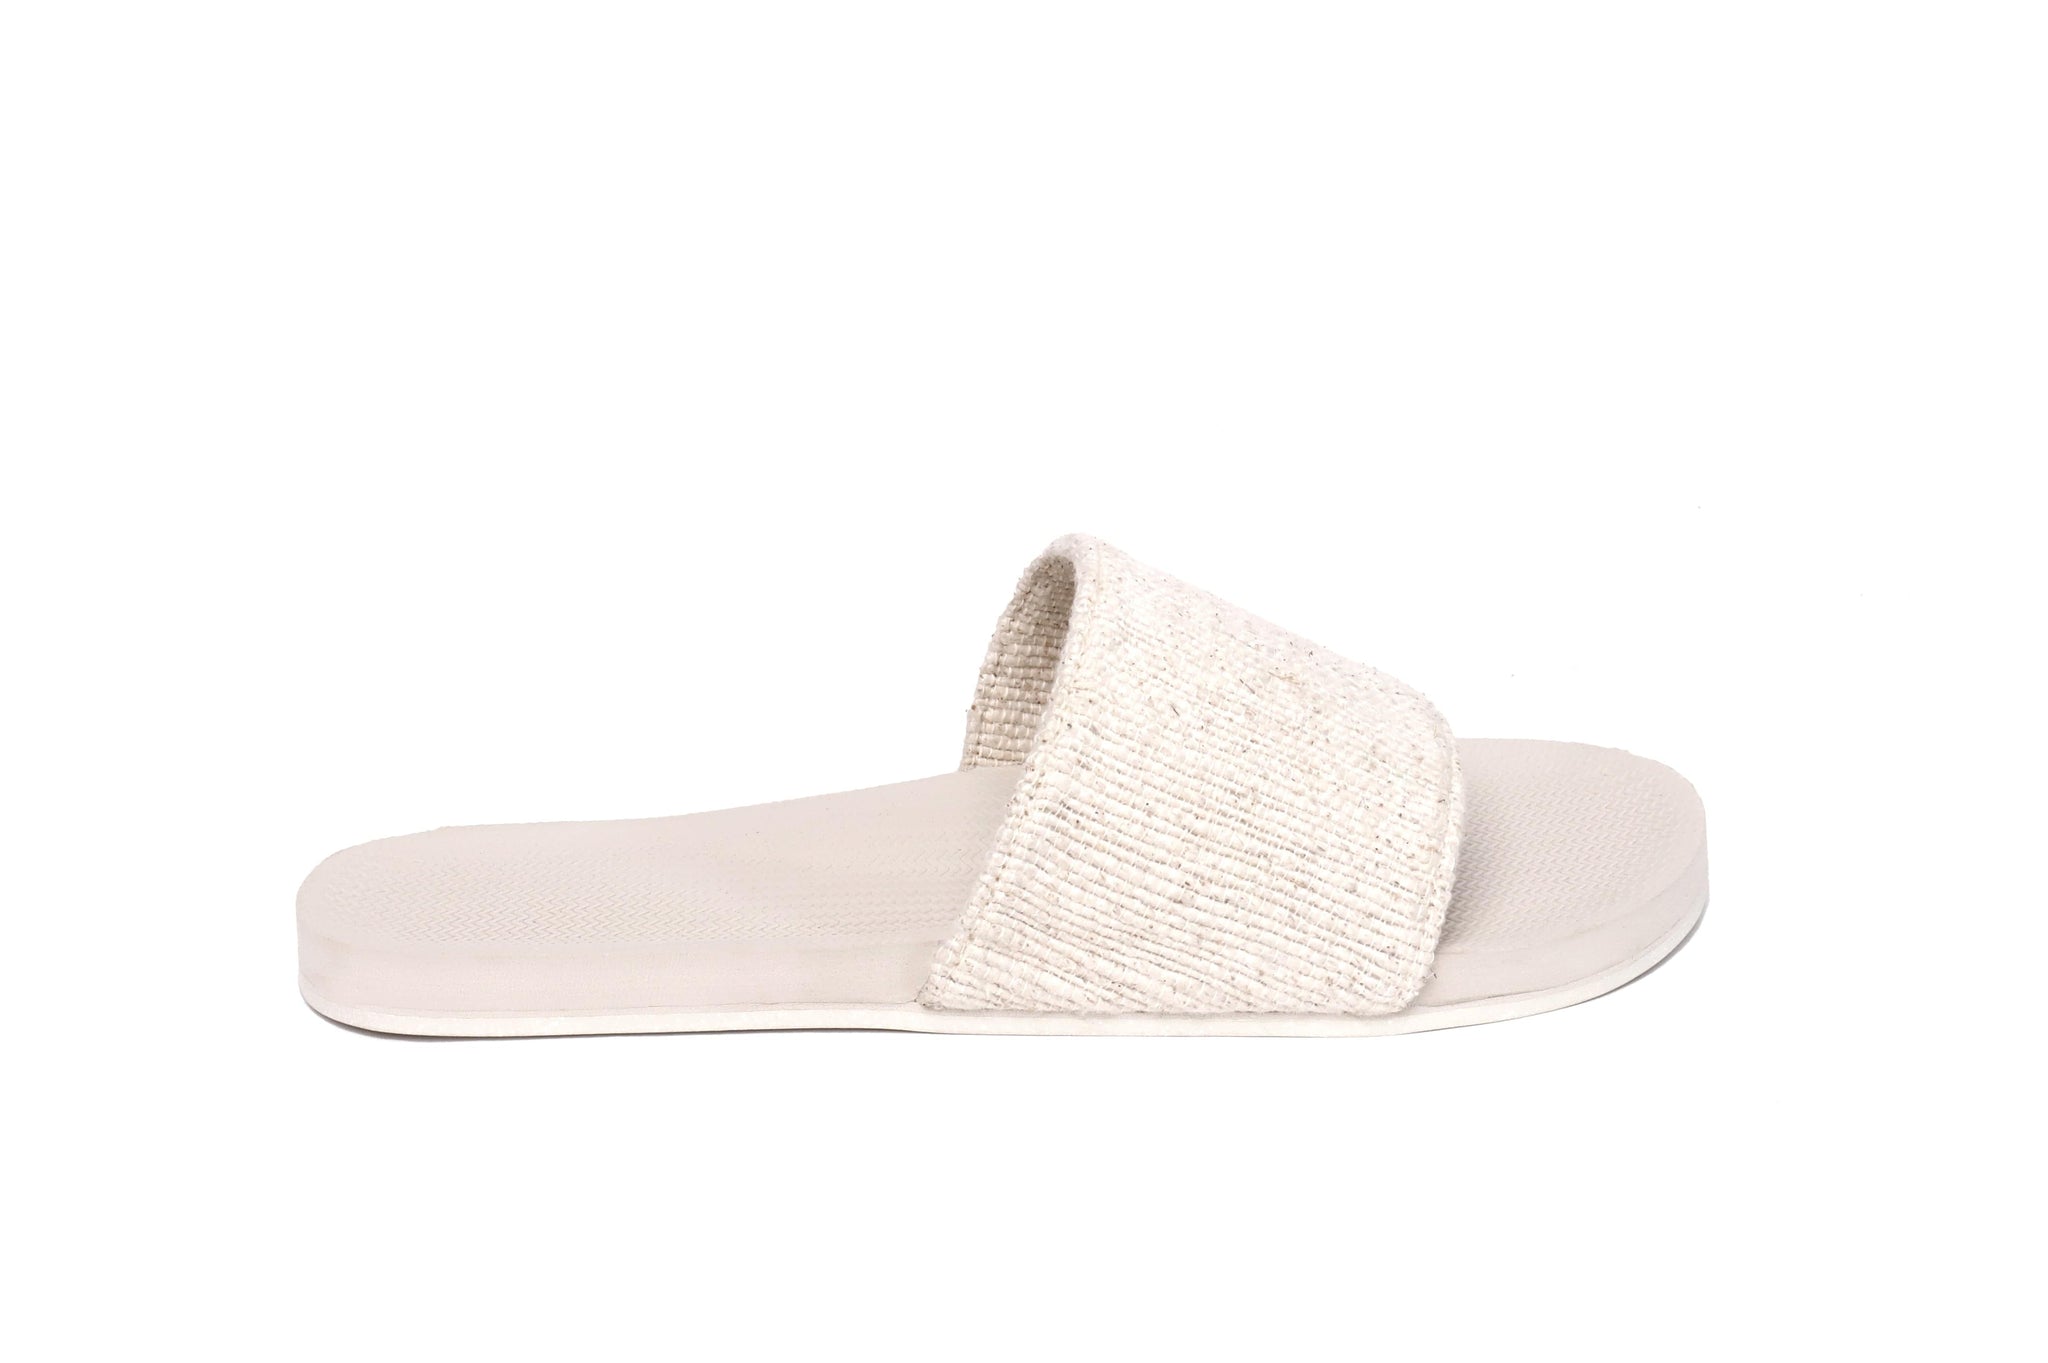 Men’s Slide Recycled Pable Straps - Natural/Sea Salt by Indosole